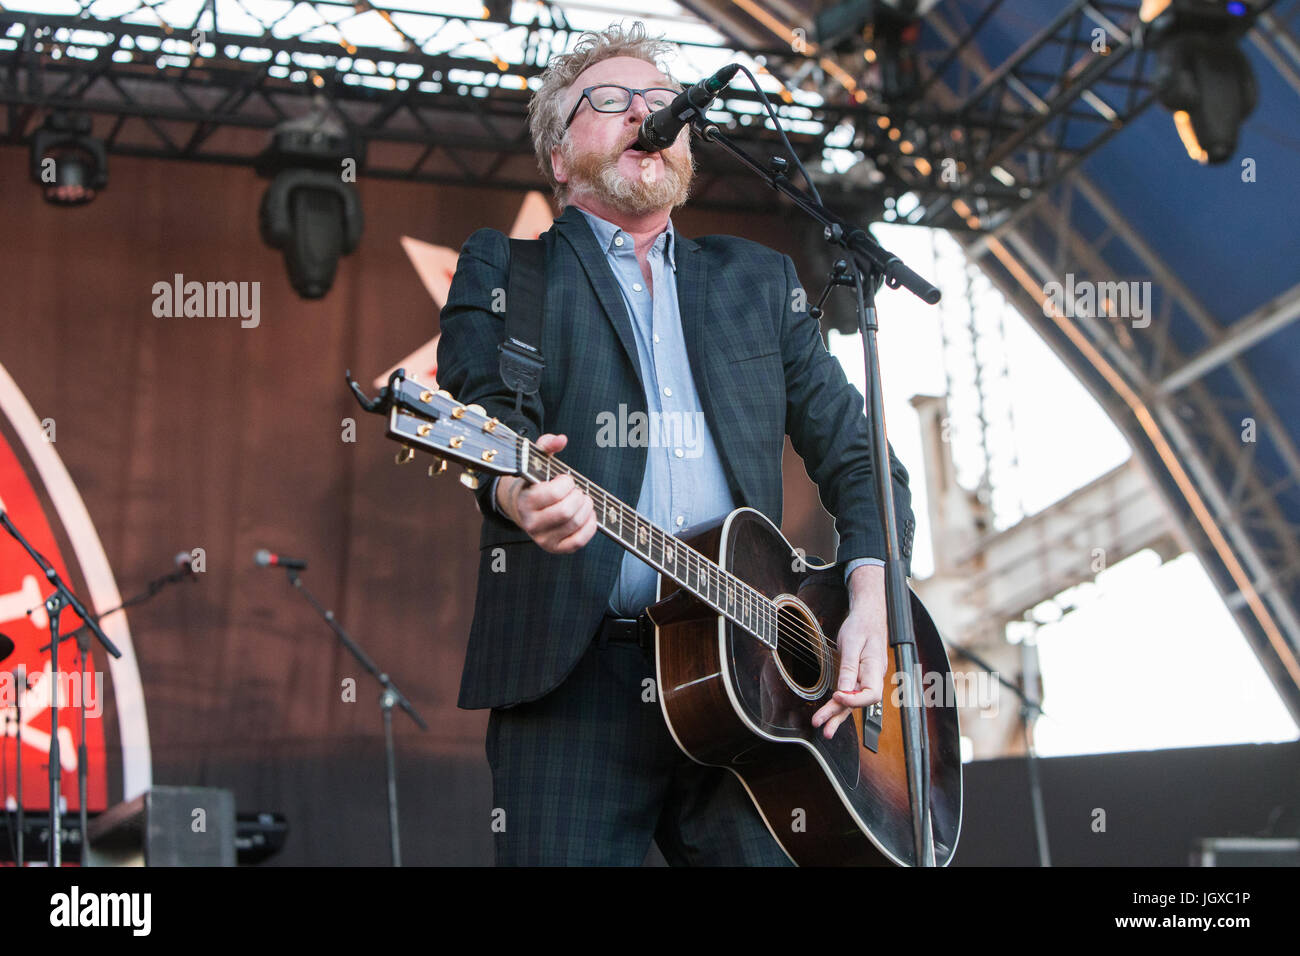 Milan Italy. 11th July 2017. The Irish-American band FLOGGING MOLLY performs live on stage at Carroponte to present their last album 'Life Is Good' Credit: Rodolfo Sassano/Alamy Live News Stock Photo